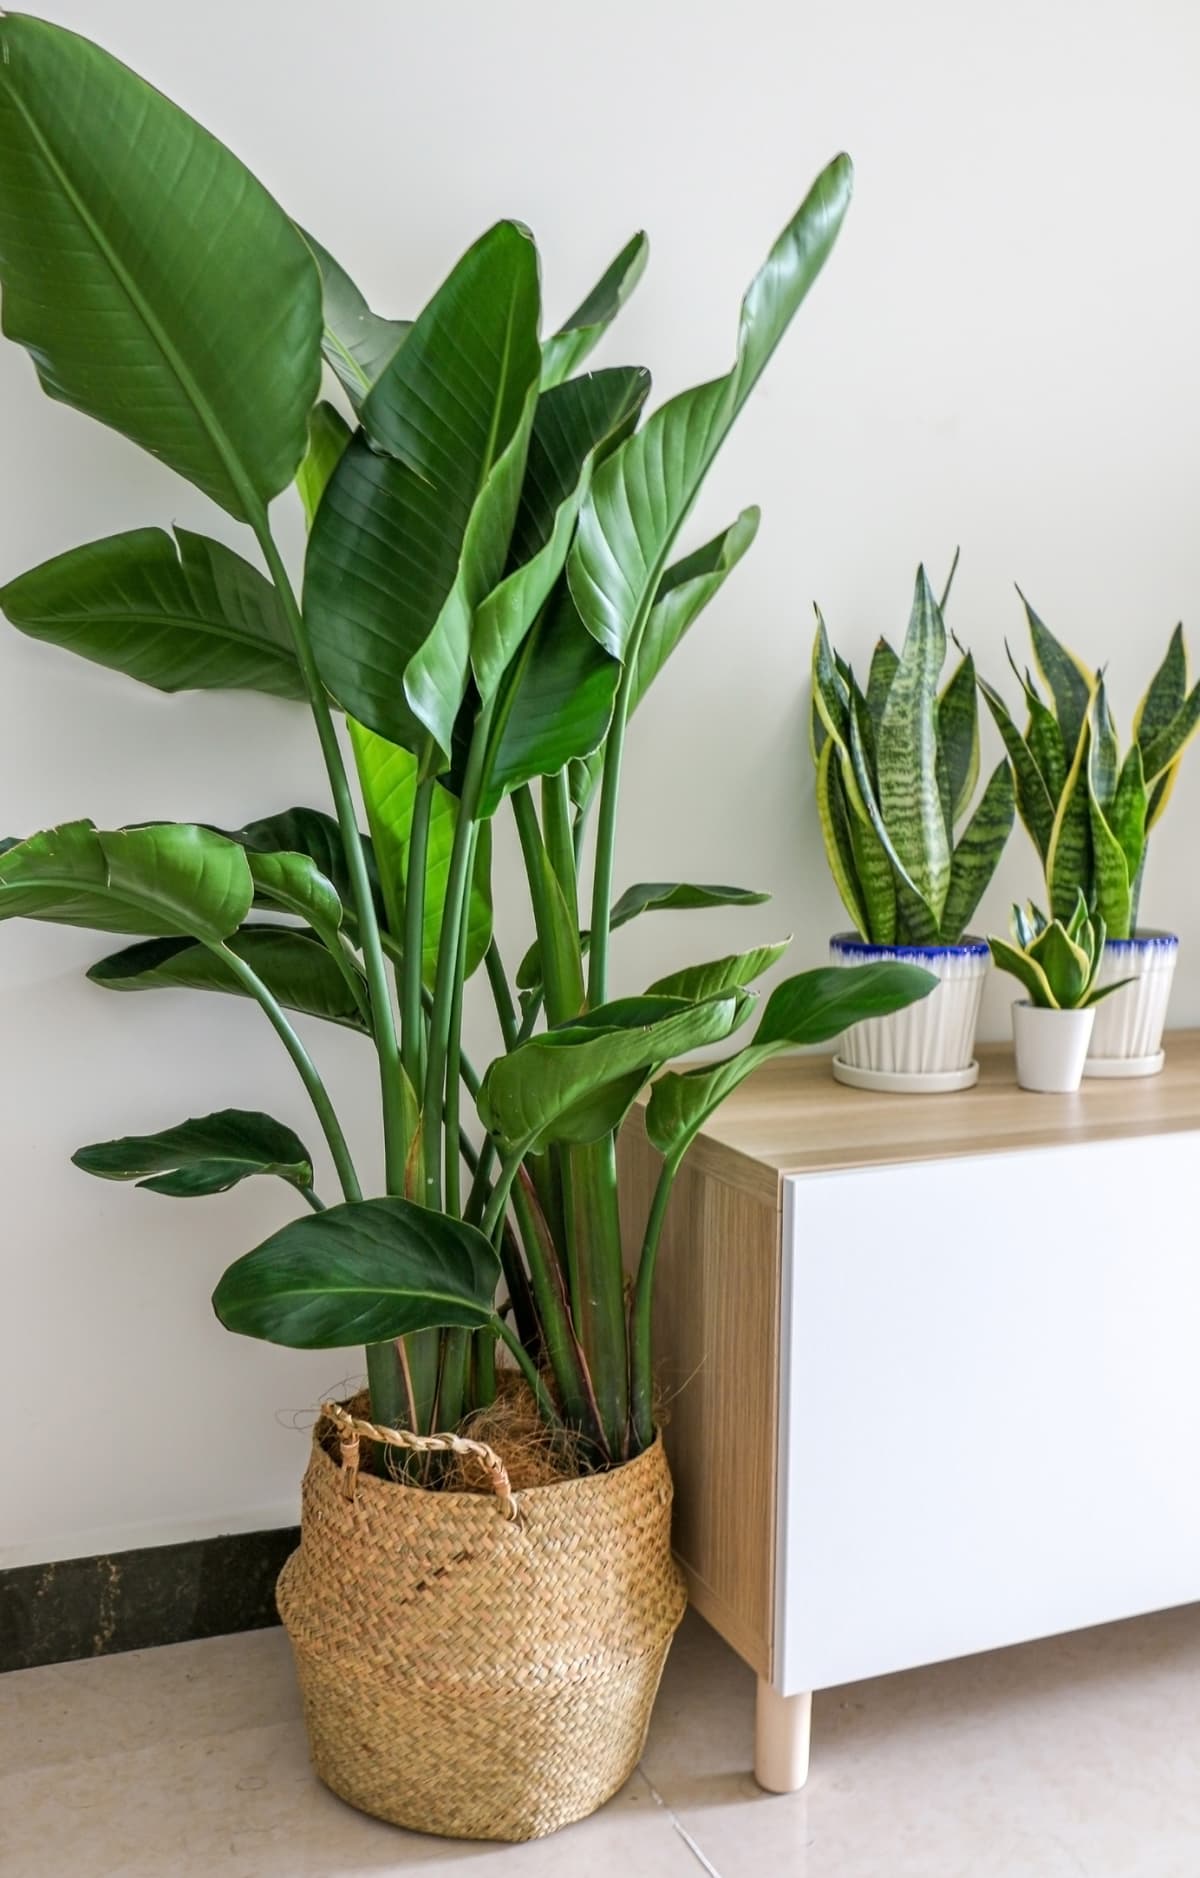 Home decorated with a giant white bird of paradise and a snake plant